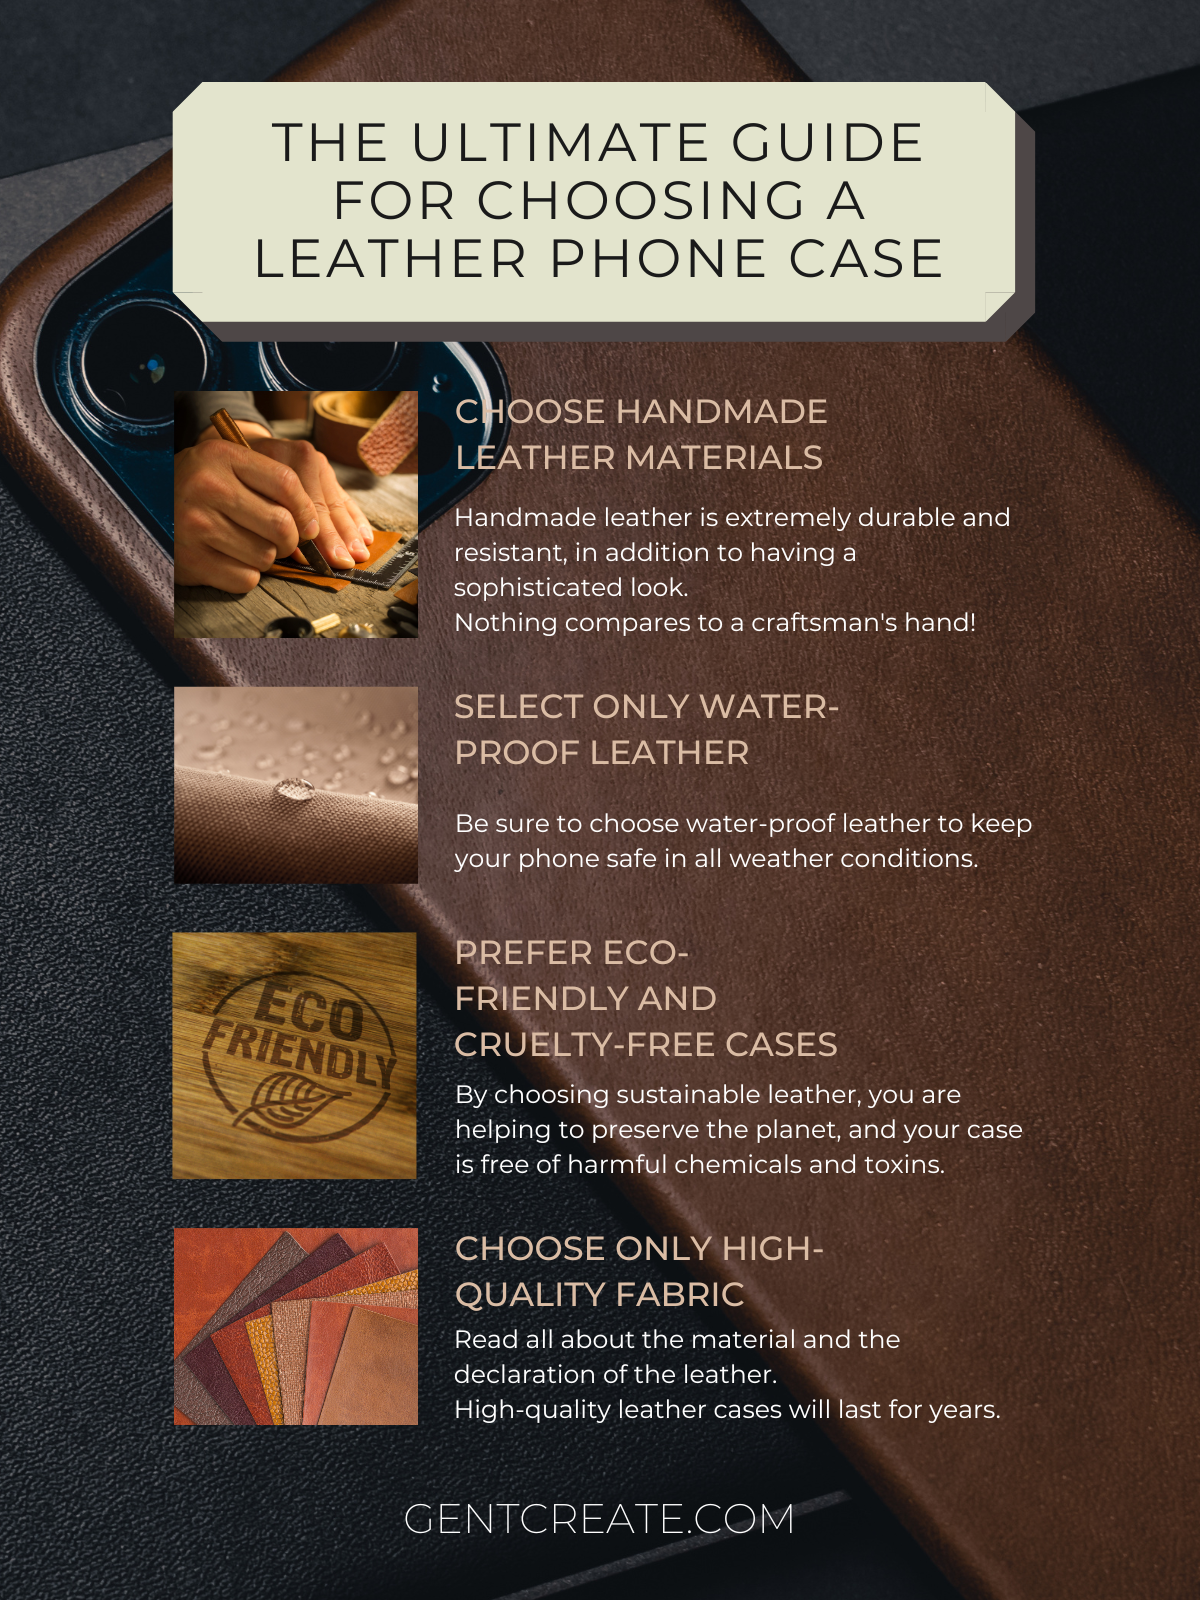 The ultimate guide for choosing a leather phone case